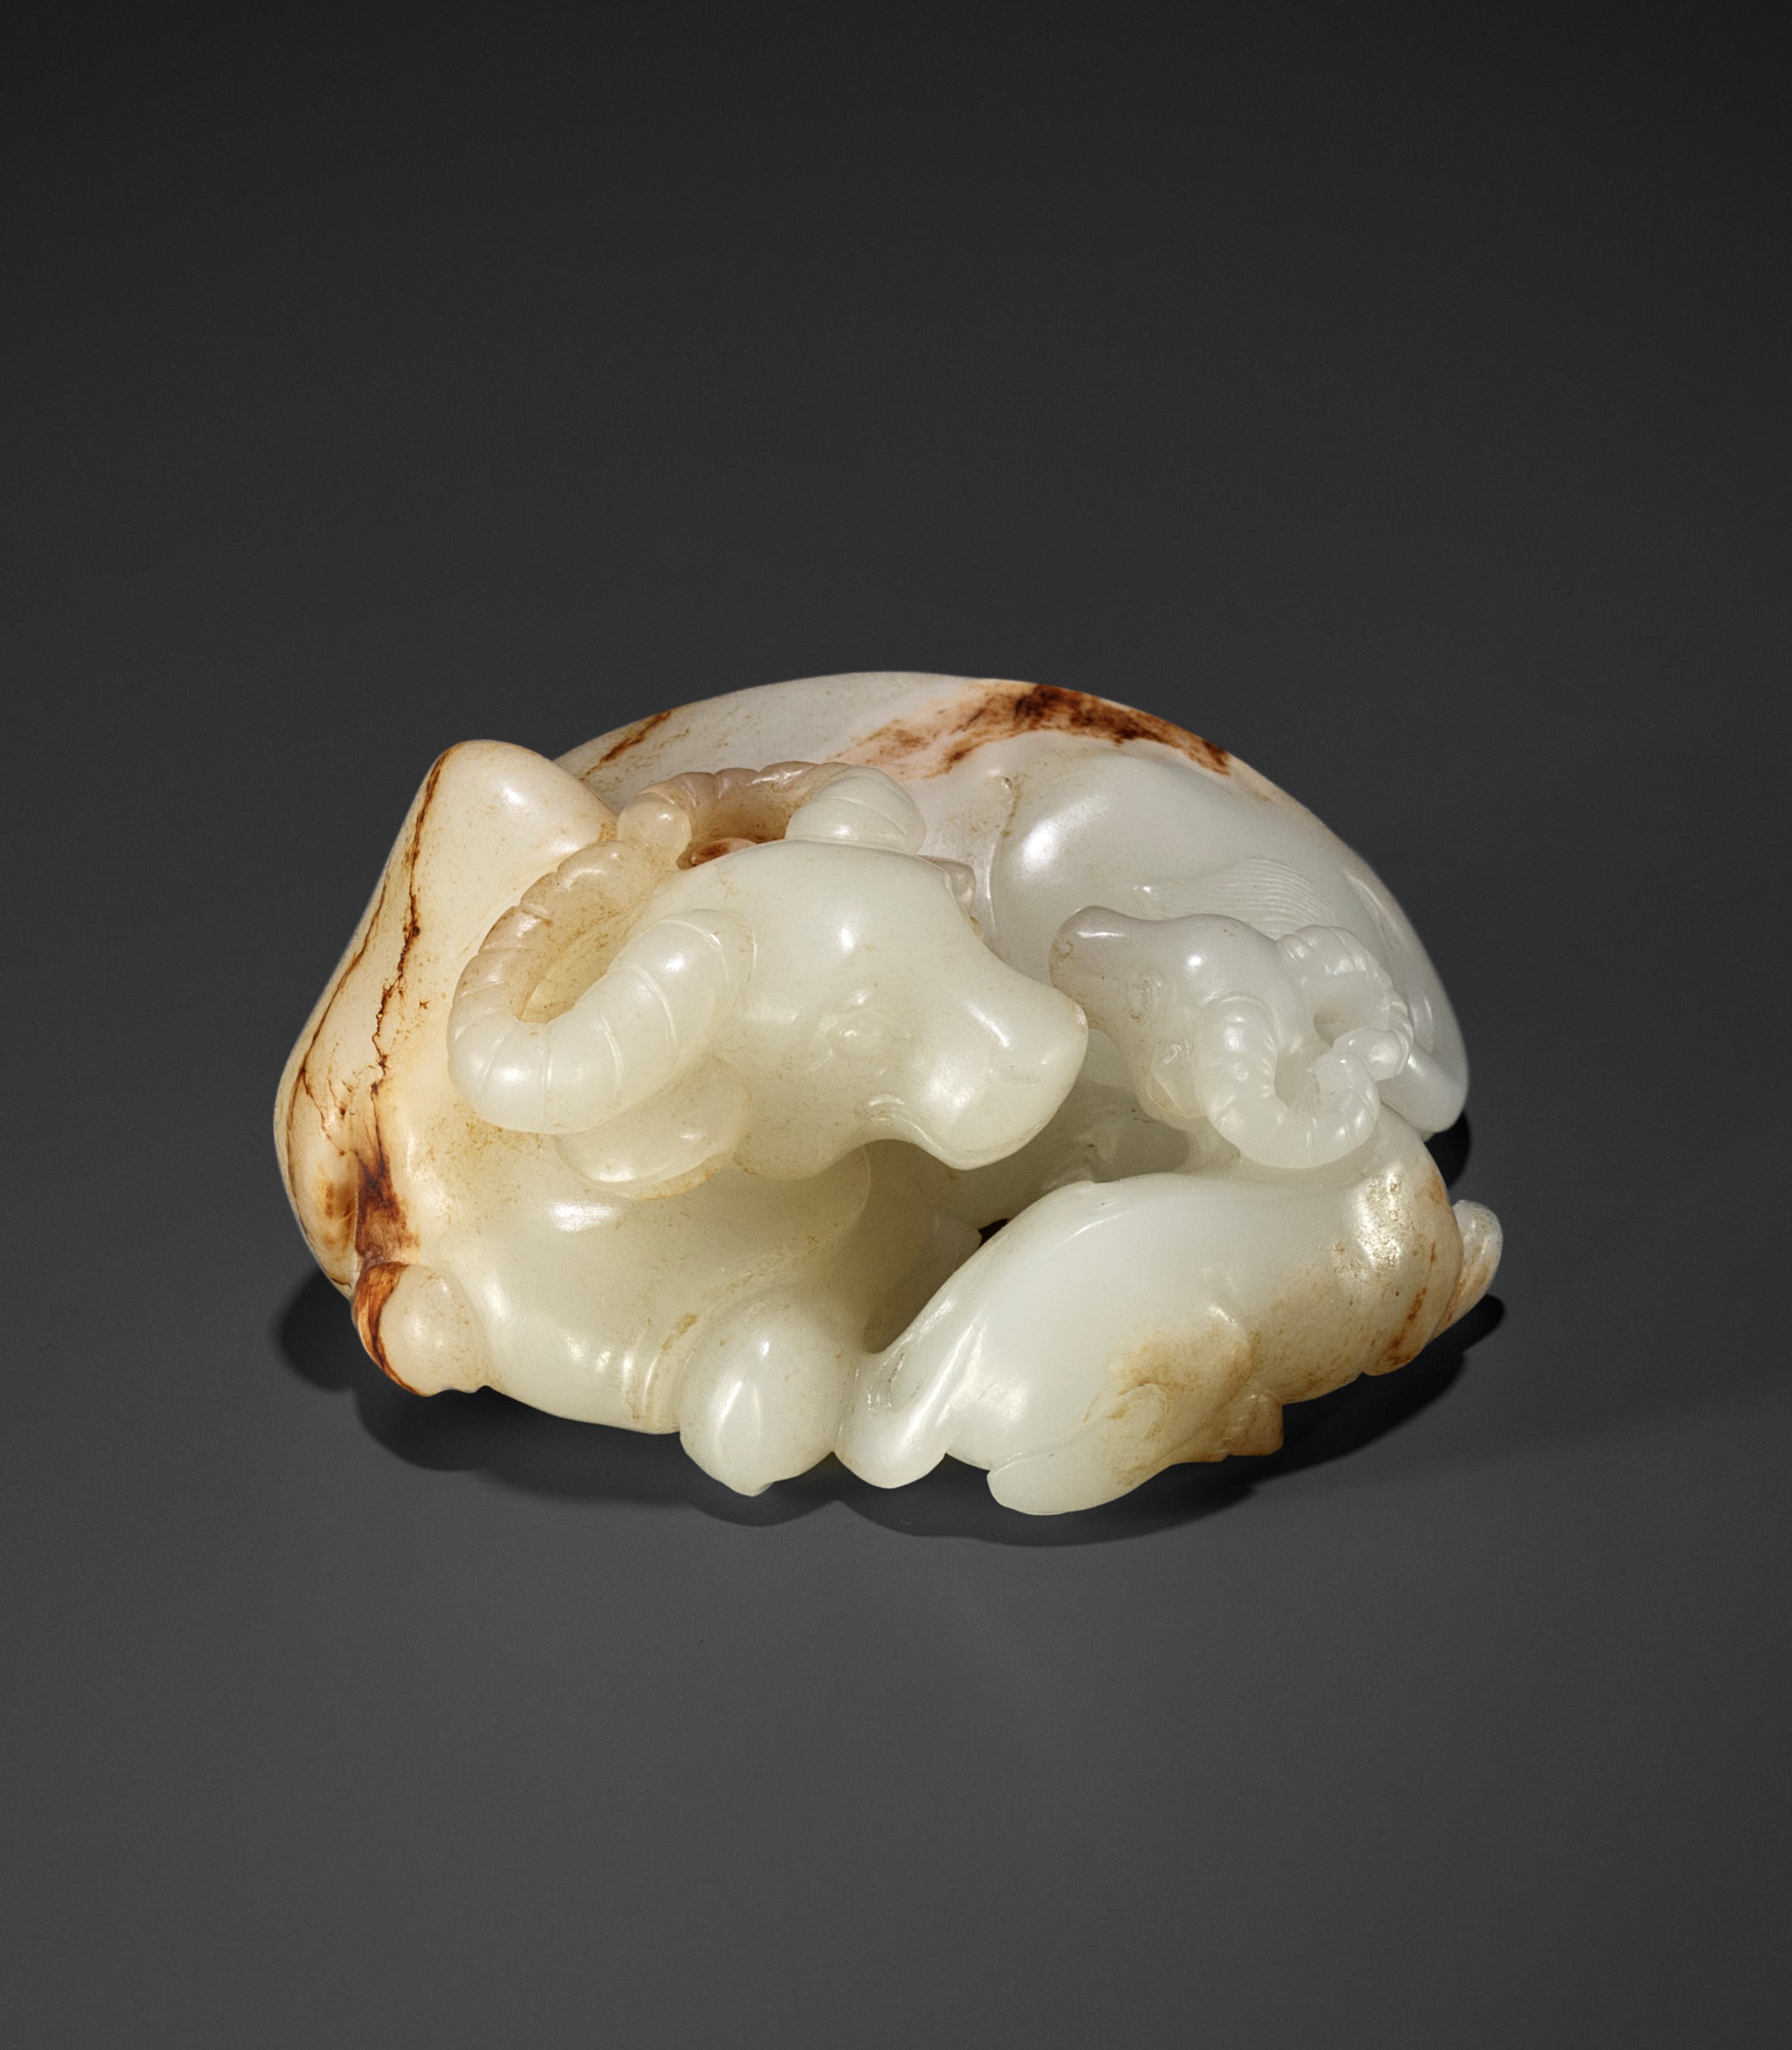 A WHITE AND RUSSET JADE GROUP OF A WATER BUFFALO AND A CALF, 18TH - 19TH CENTURY